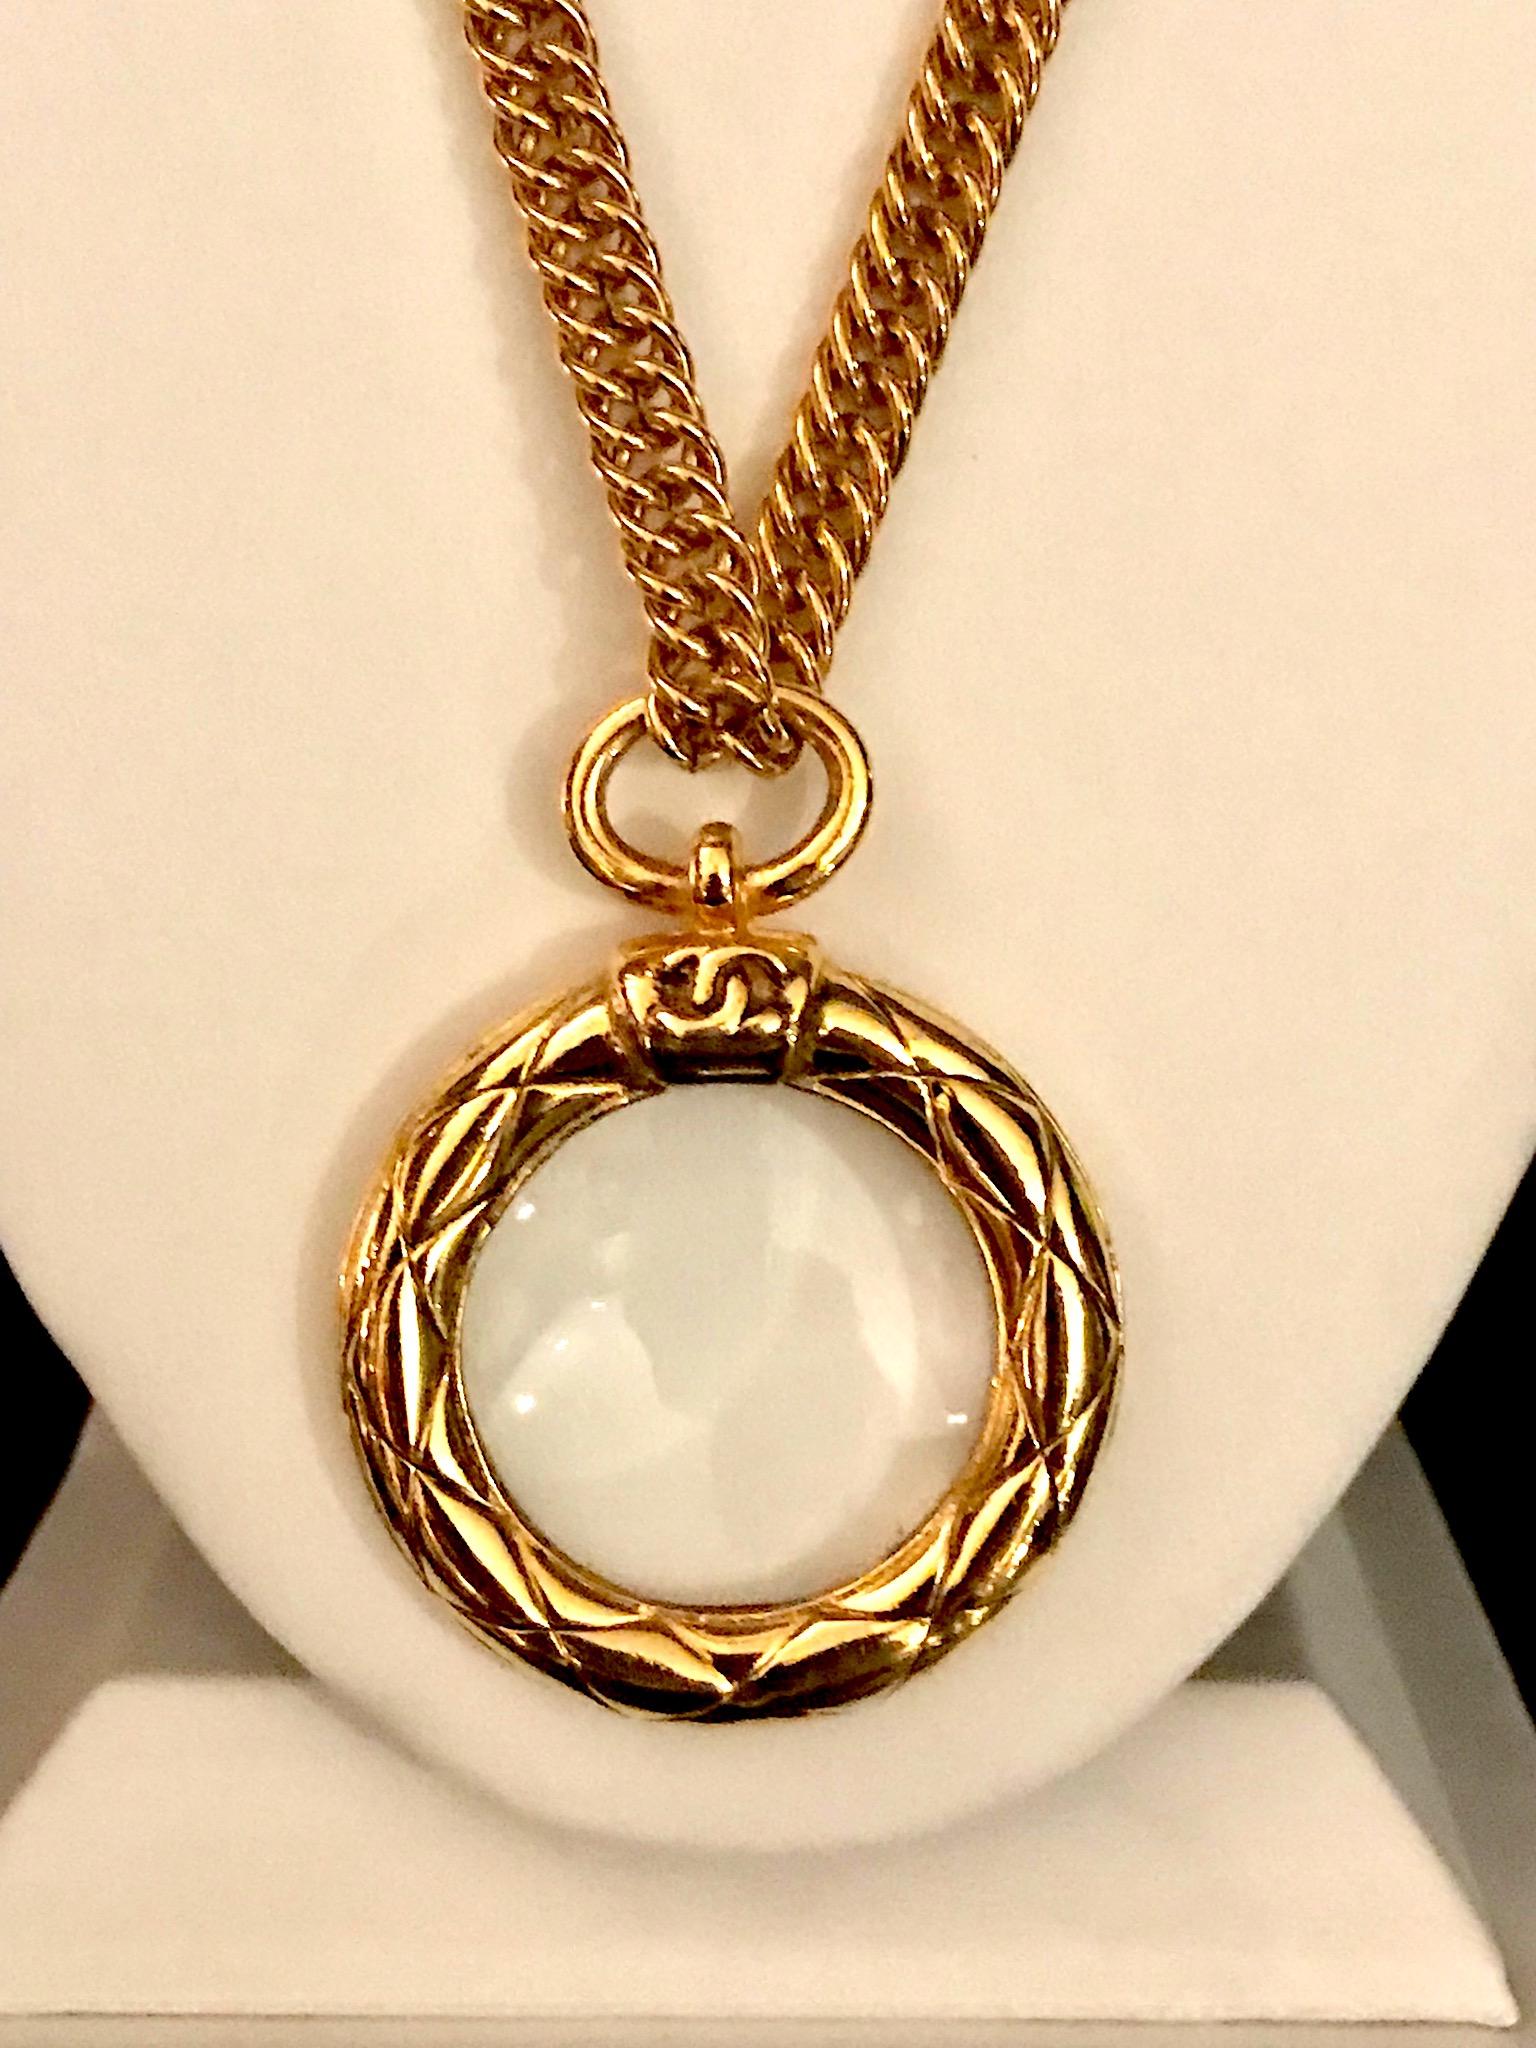 An iconic Chanel quilt frame magnifying glass pendant necklace from the early 1980s. The pendant has a glass magnifying lens set into the round quilt frame and measures 2